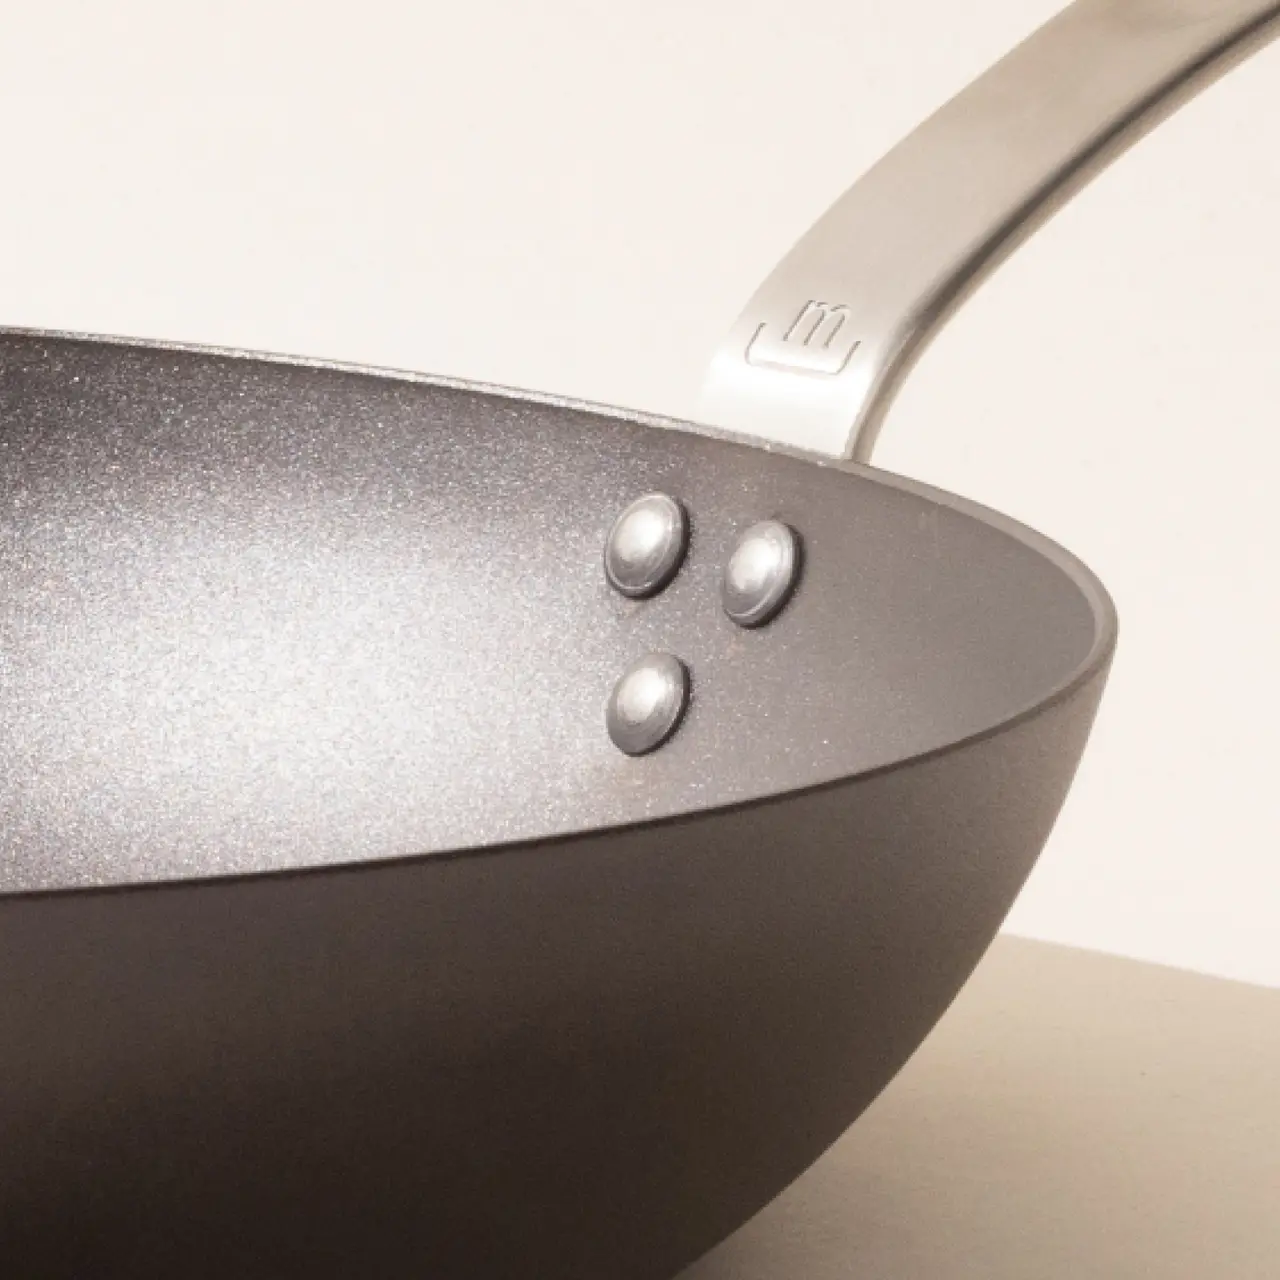 A close-up of a non-stick frying pan focusing on its interior surface and the rivets attaching the handle.